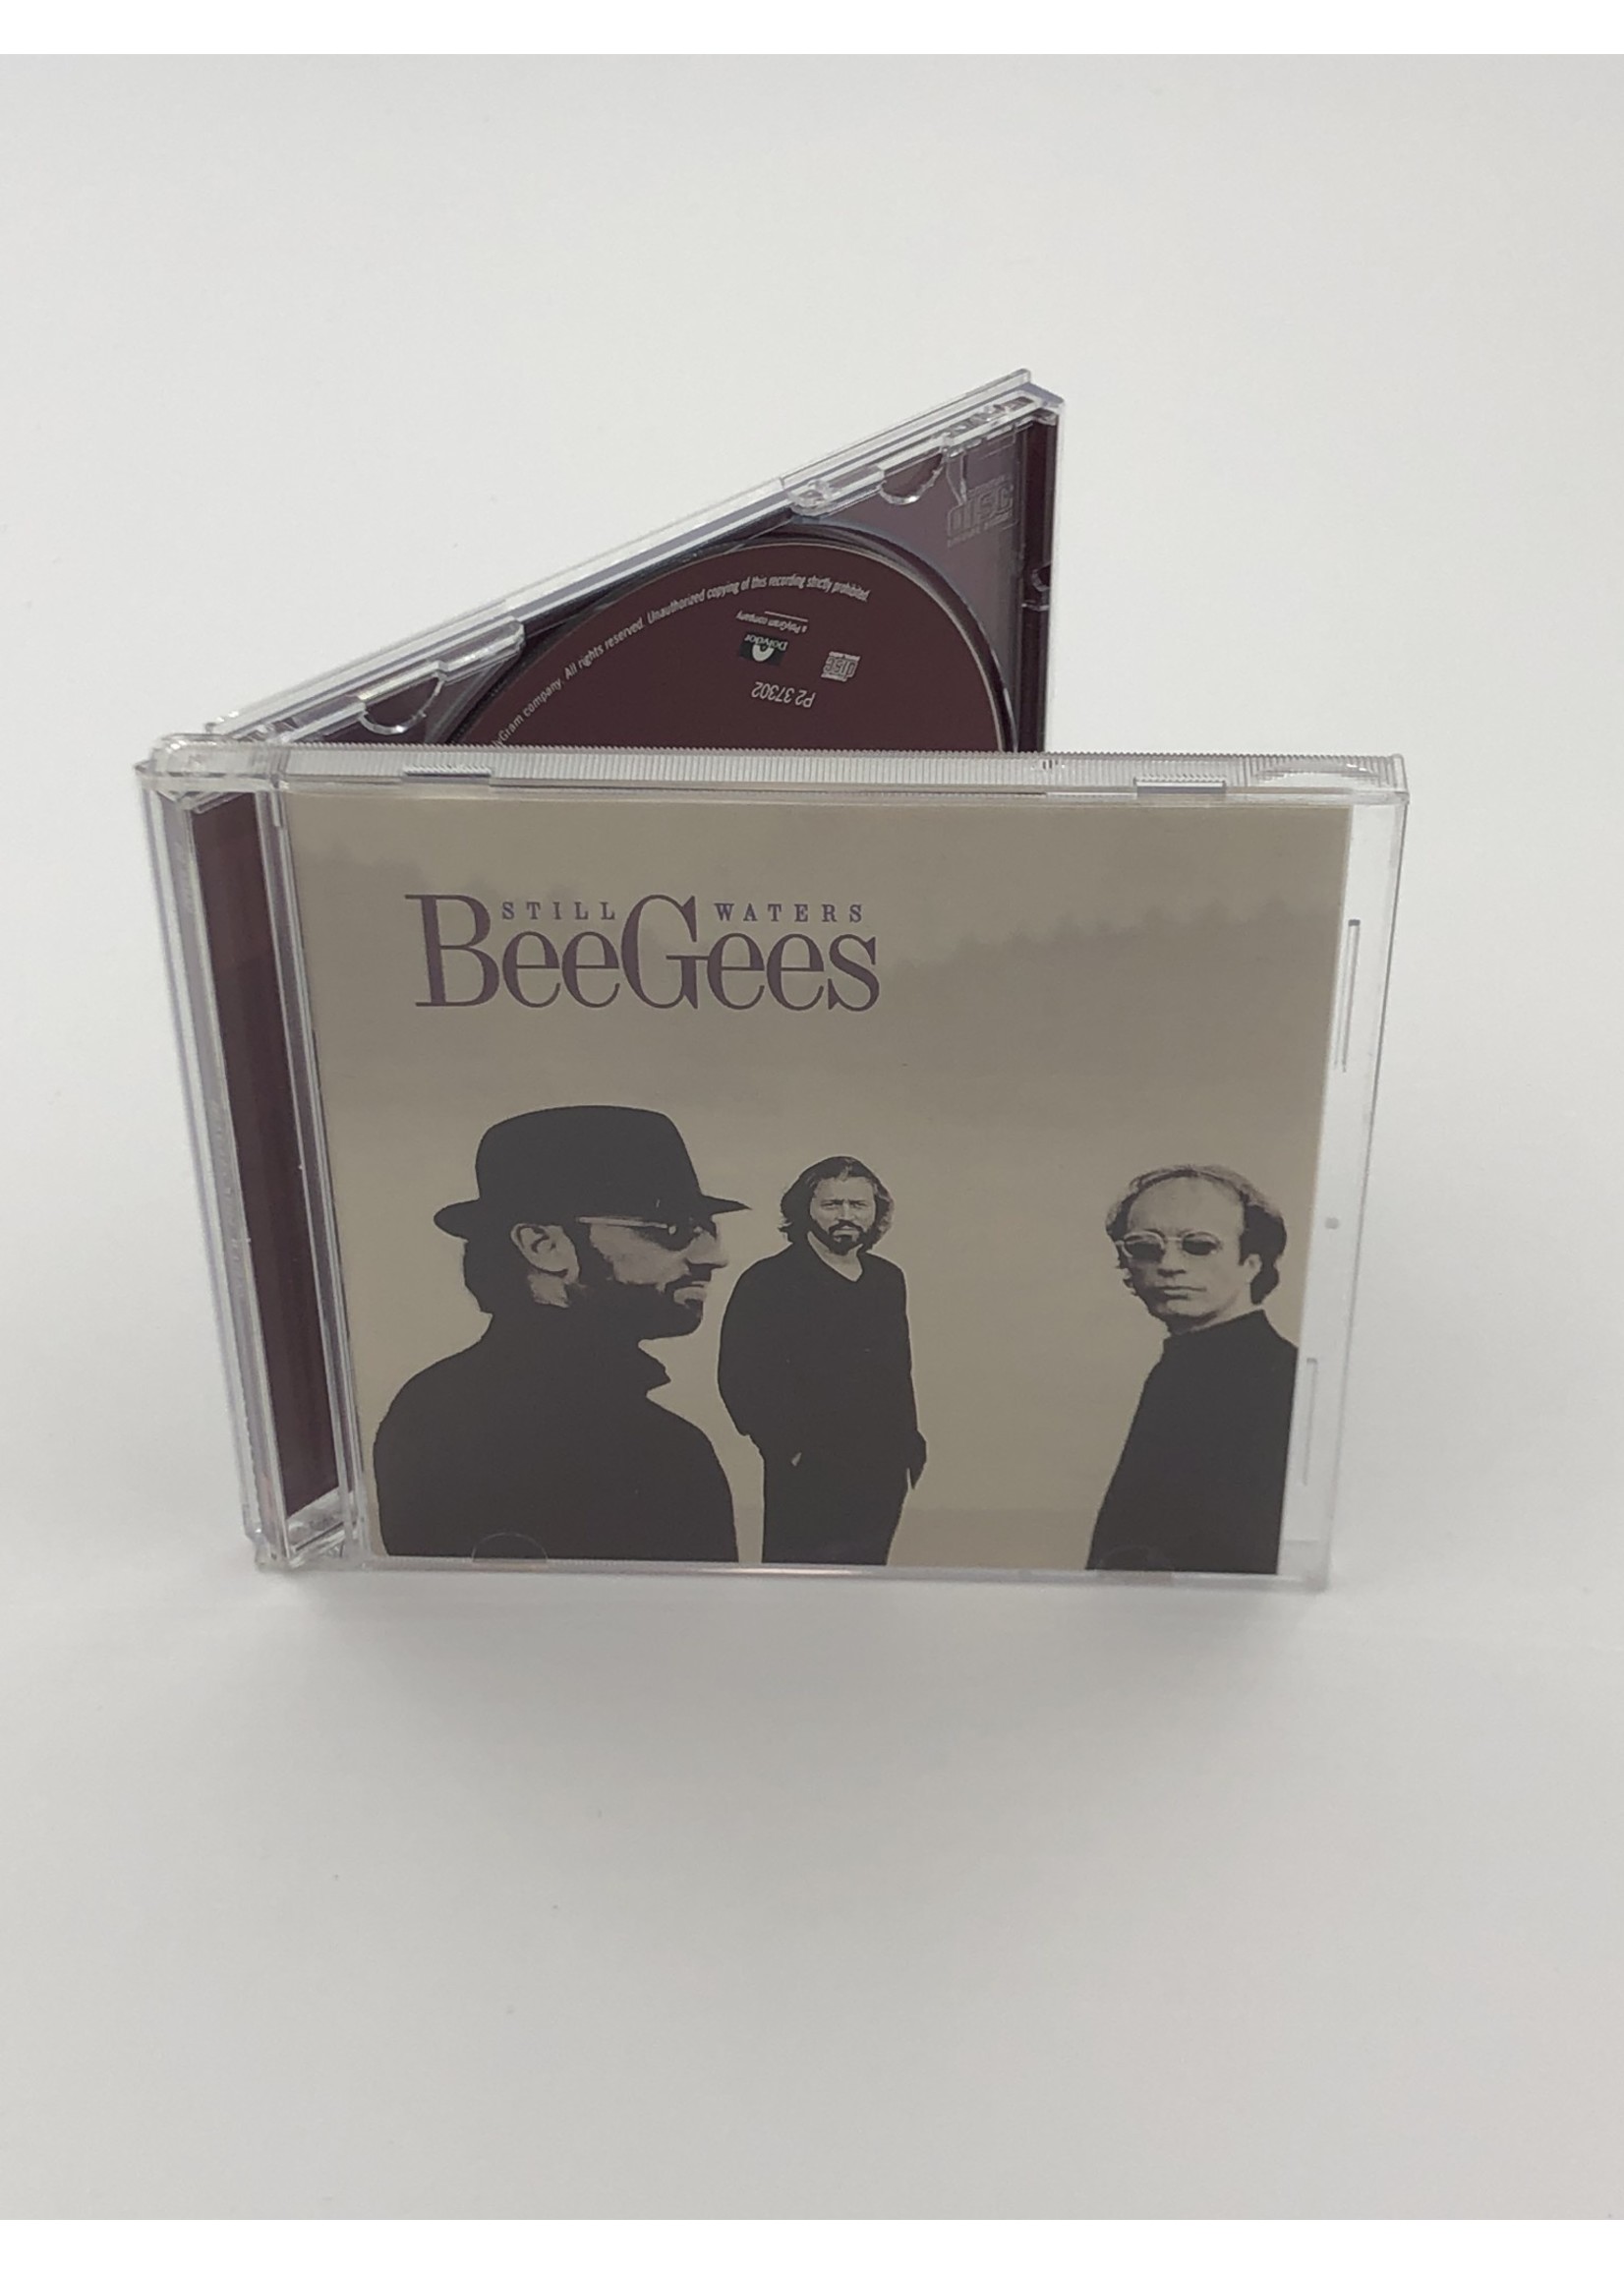 CD BeeGees: Still Waters CD